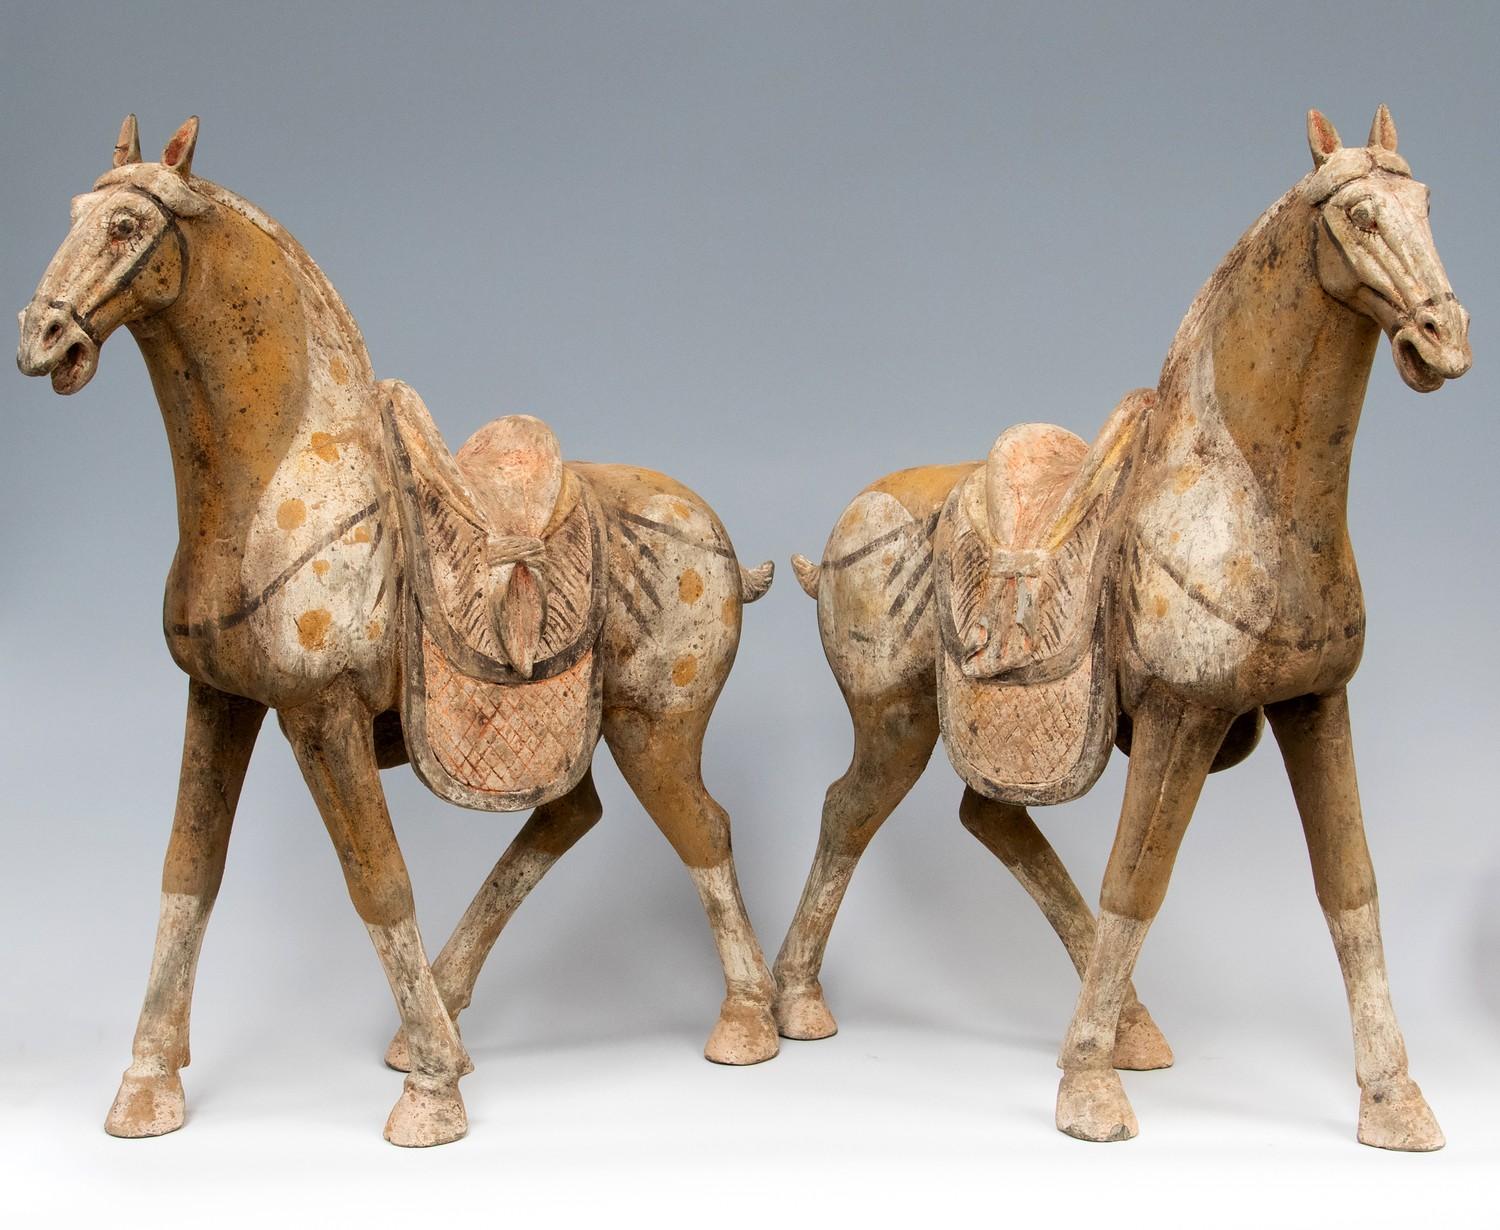 Large pair of Tang dynasty painted pottery horses with saddles (618-907AD) -22" x 20"